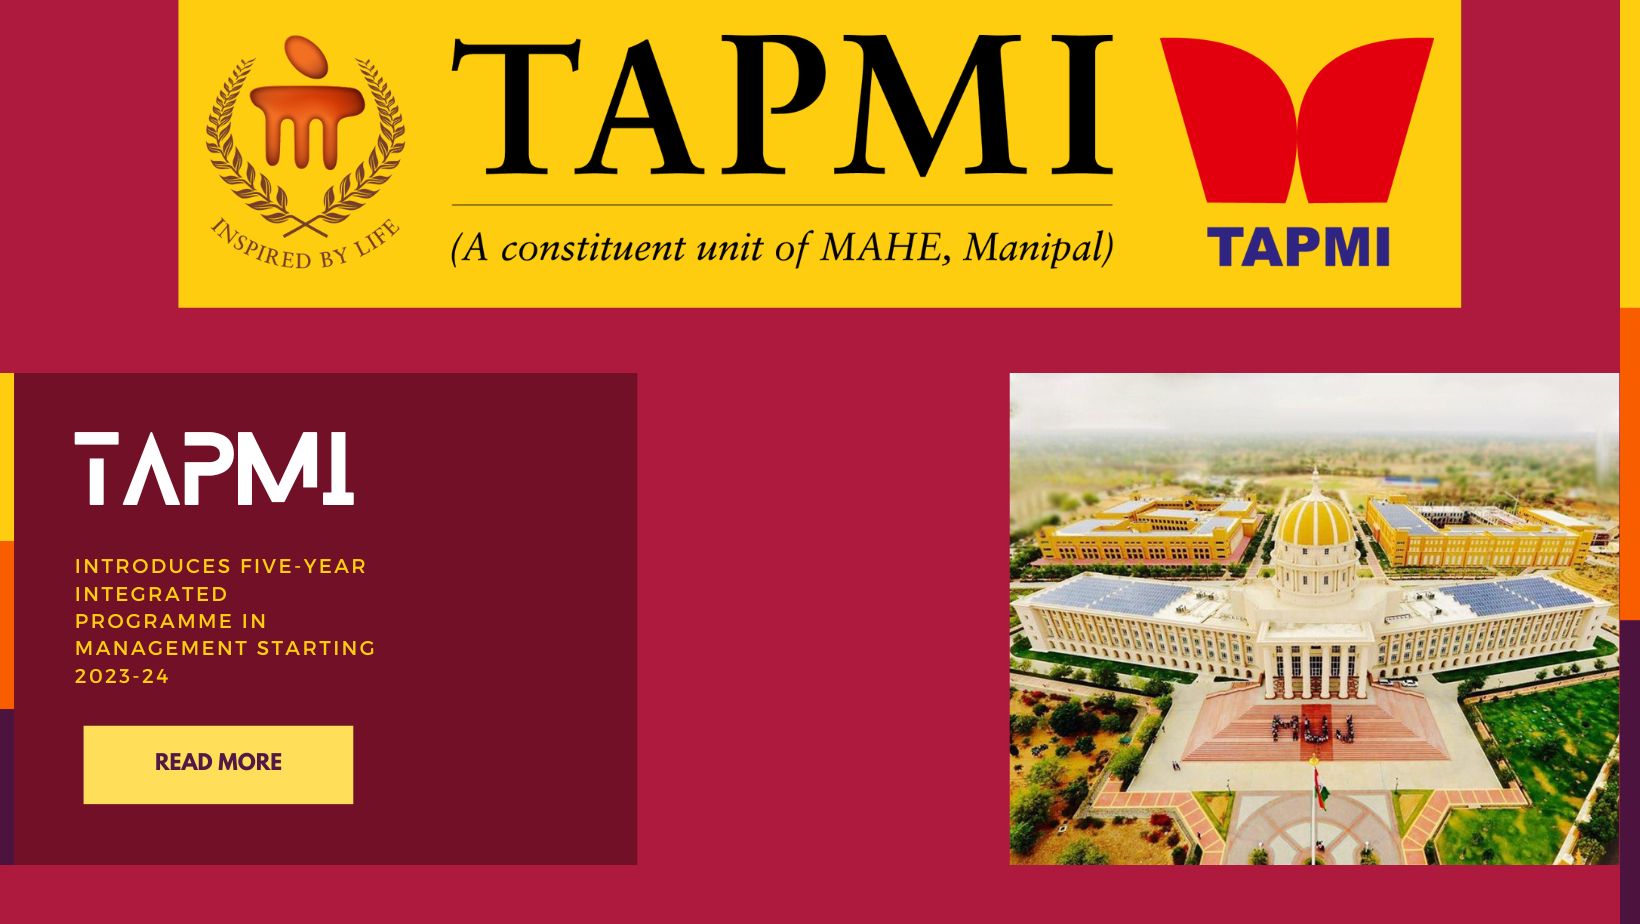 TAPMI Introduces Five-Year Integrated Programme in Management Starting 2023-24